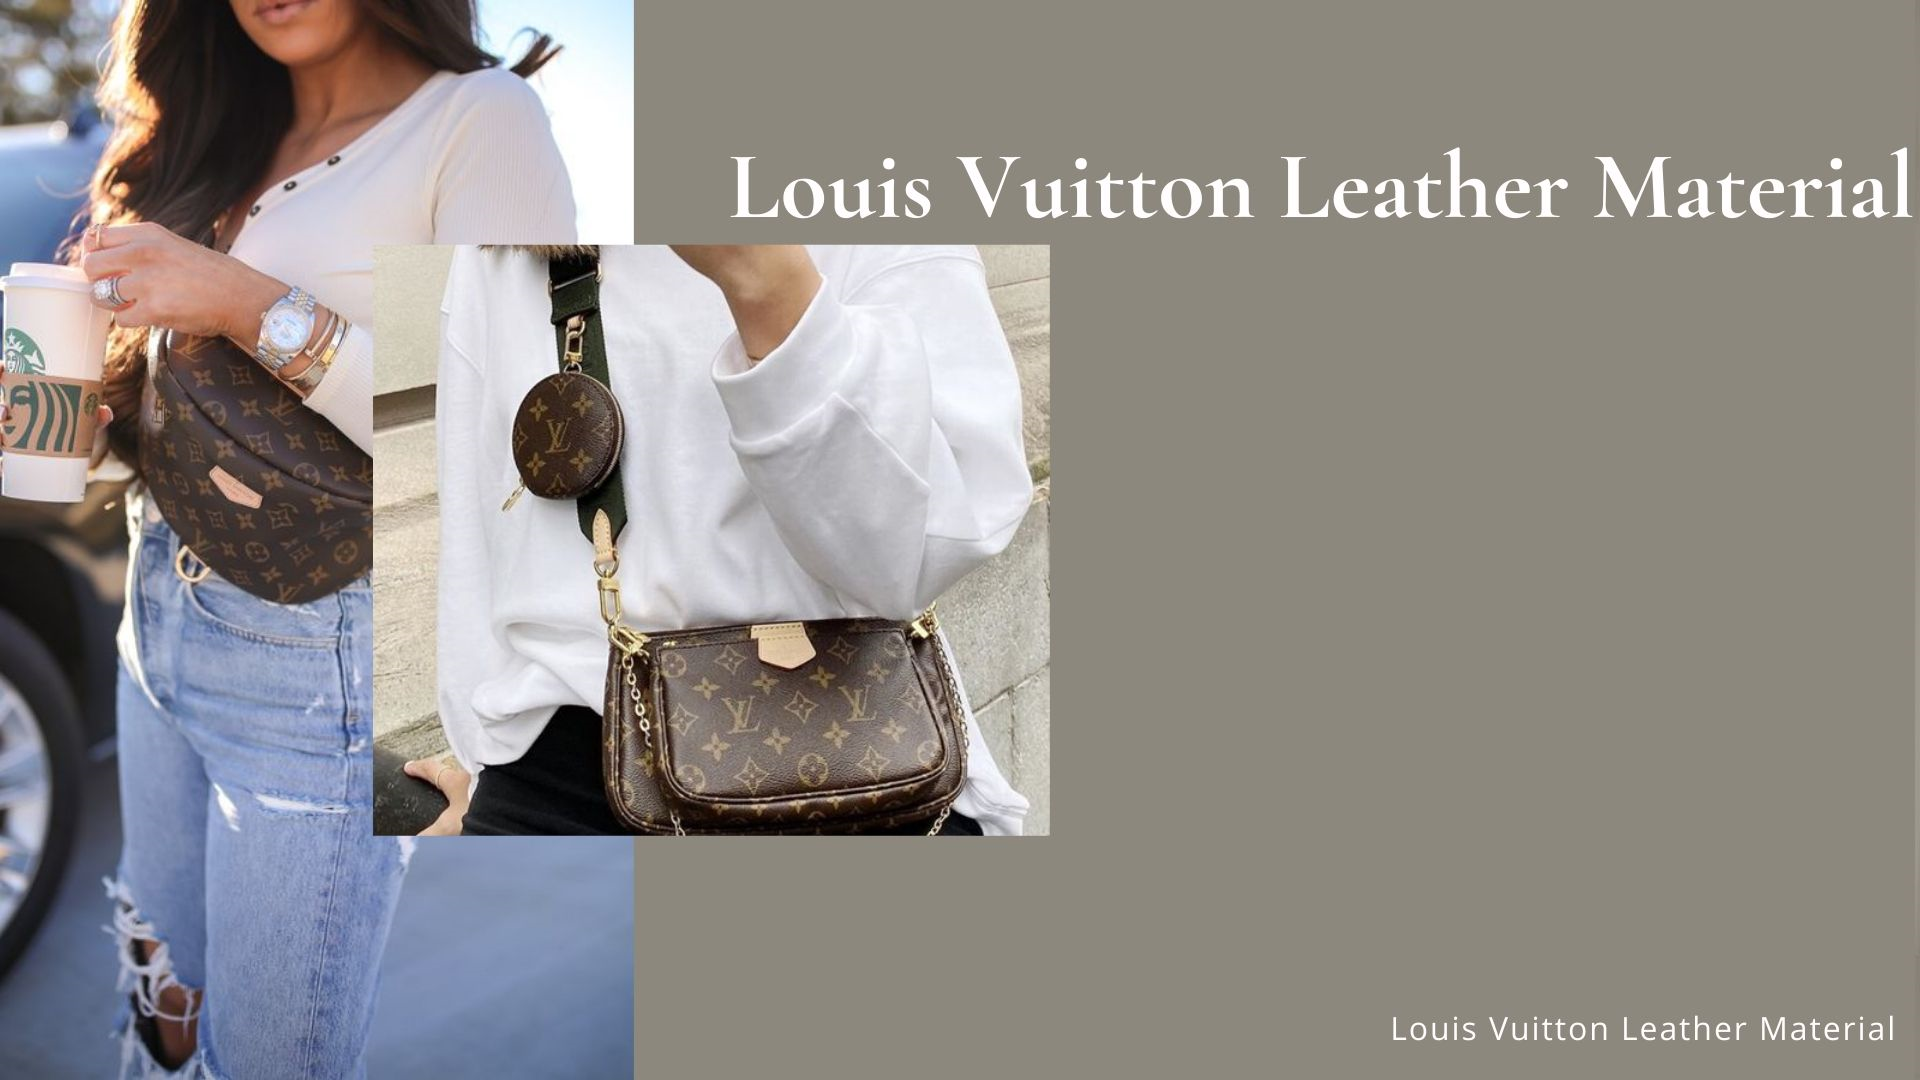 Louis Vuitton Leather Material